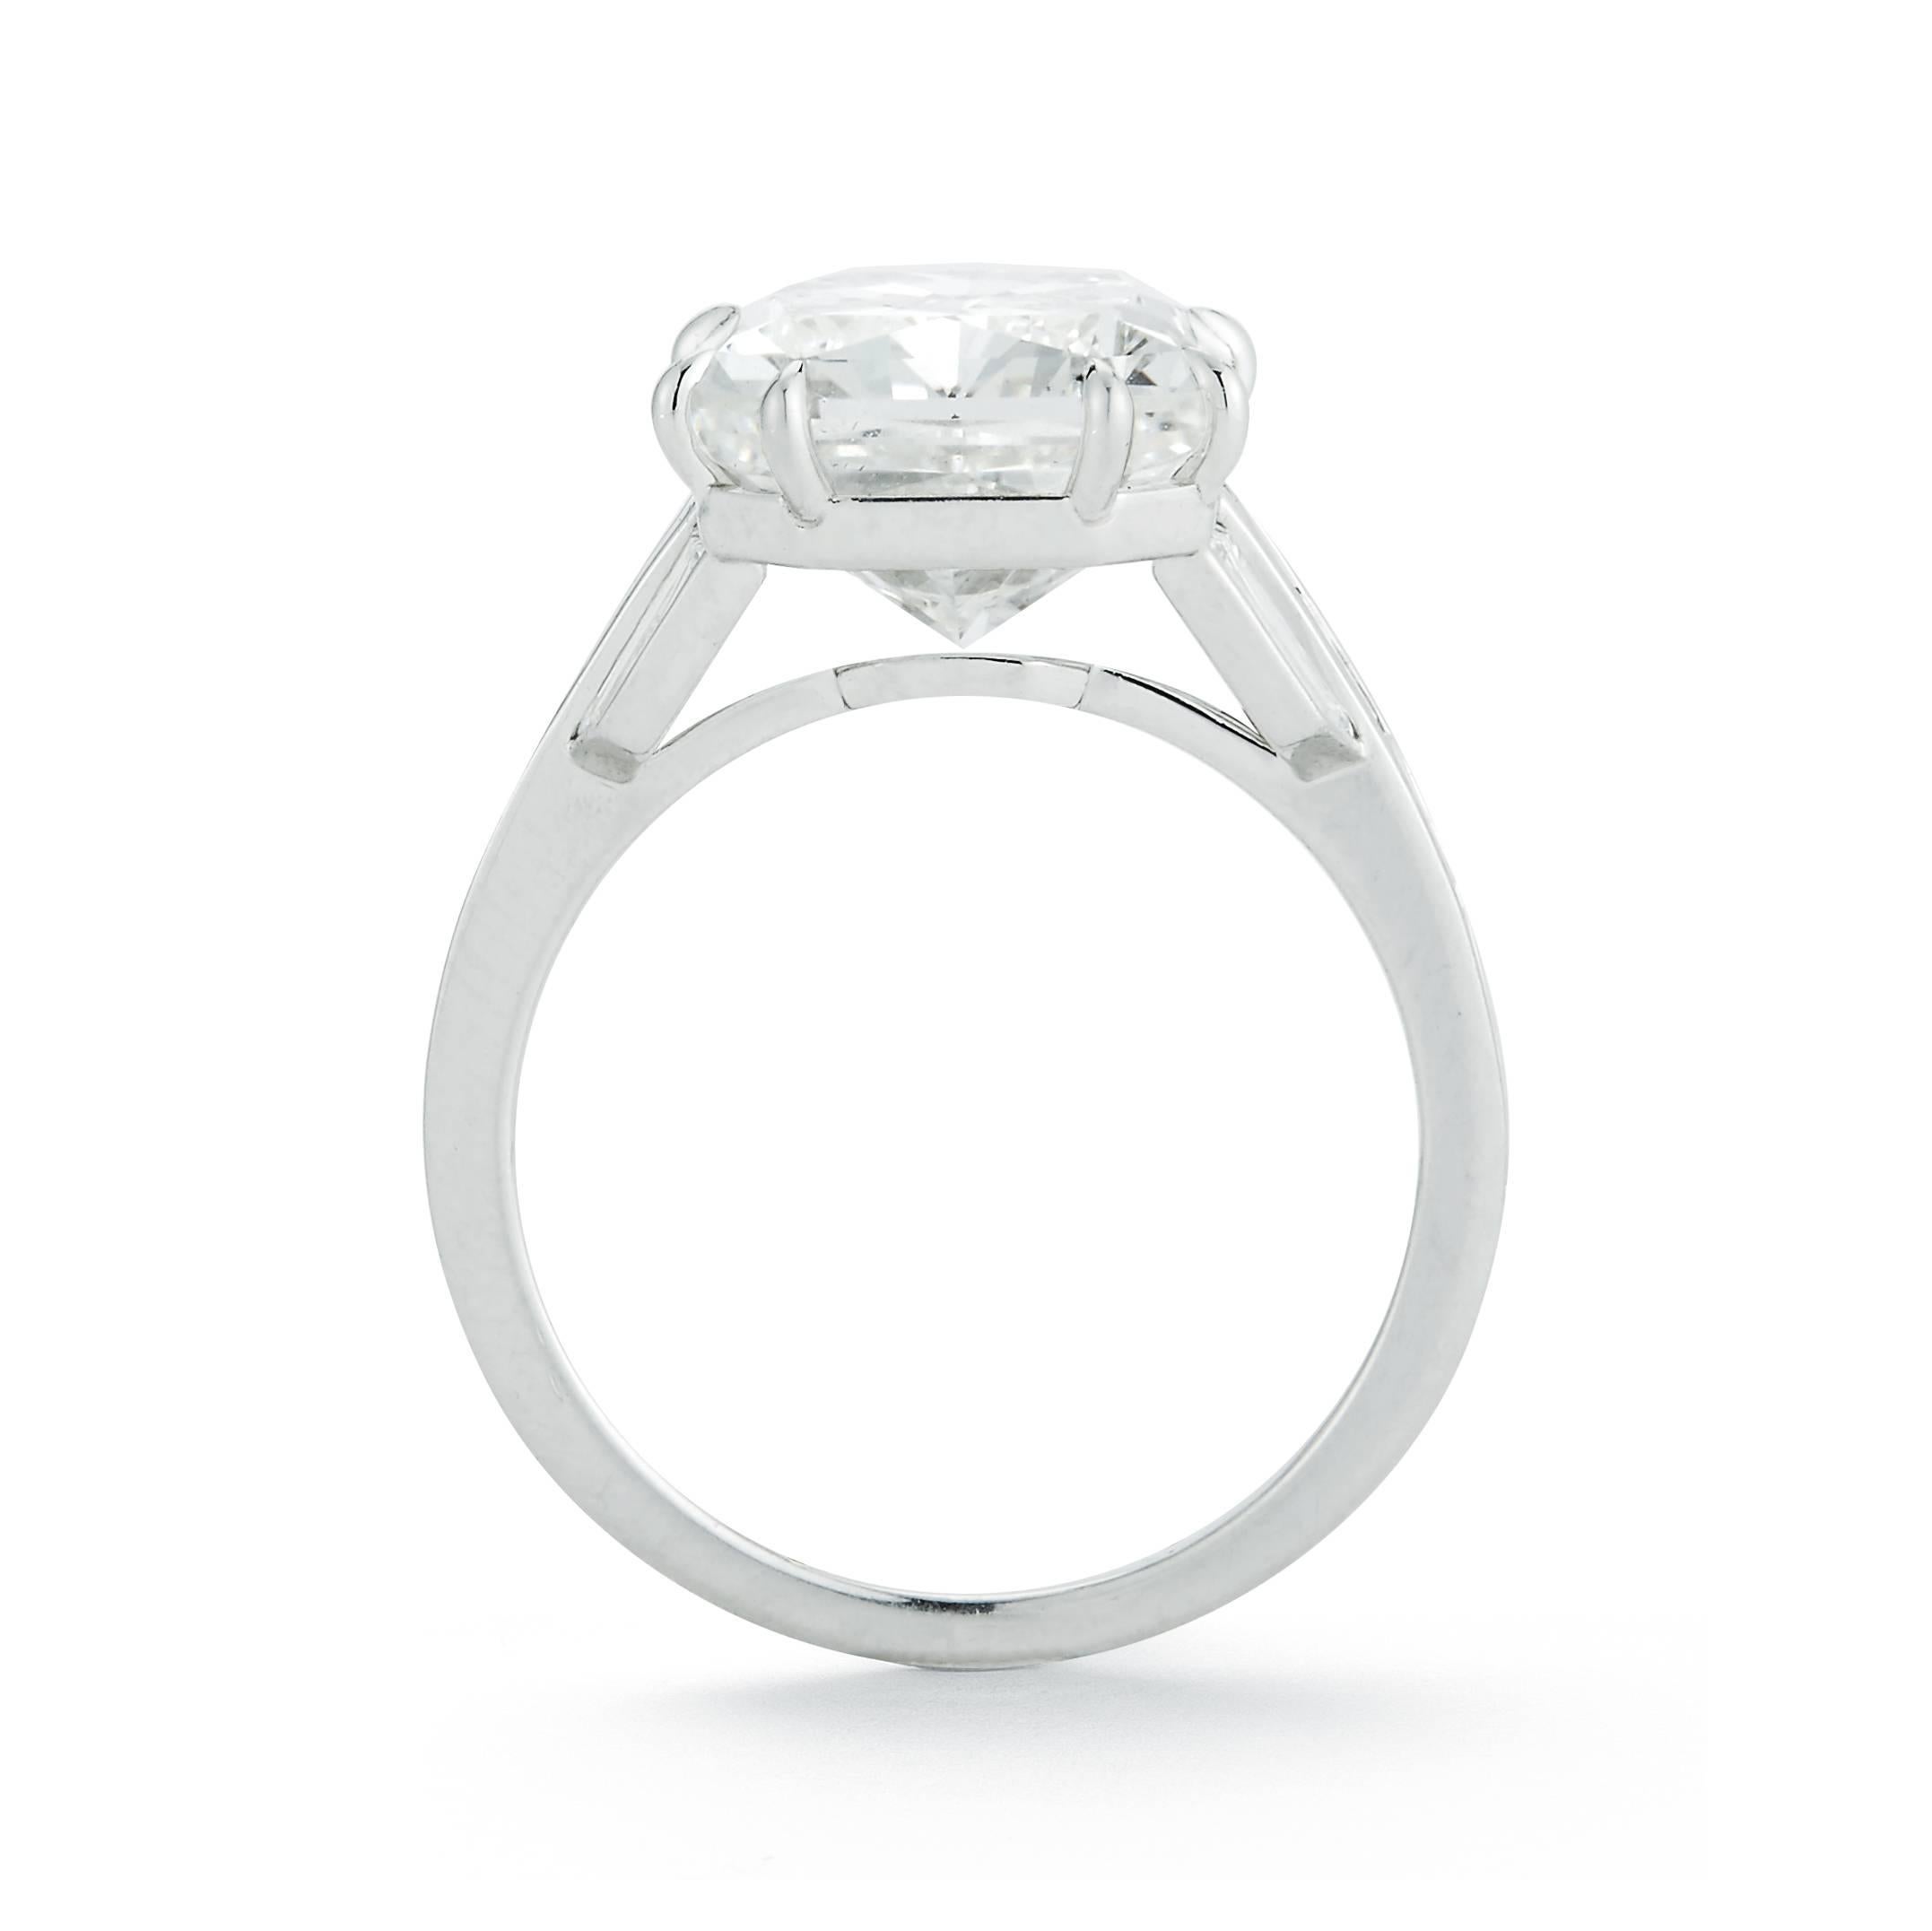 Set with a radiant-cut diamond, weighing approximately 7.09 carats, flanked to each side by baguette-cut diamonds and with tapered baguette-cut diamond detail, mounted in platinum

Size 6 (can be sized)

With report 1142800839 dated 29 June 2012